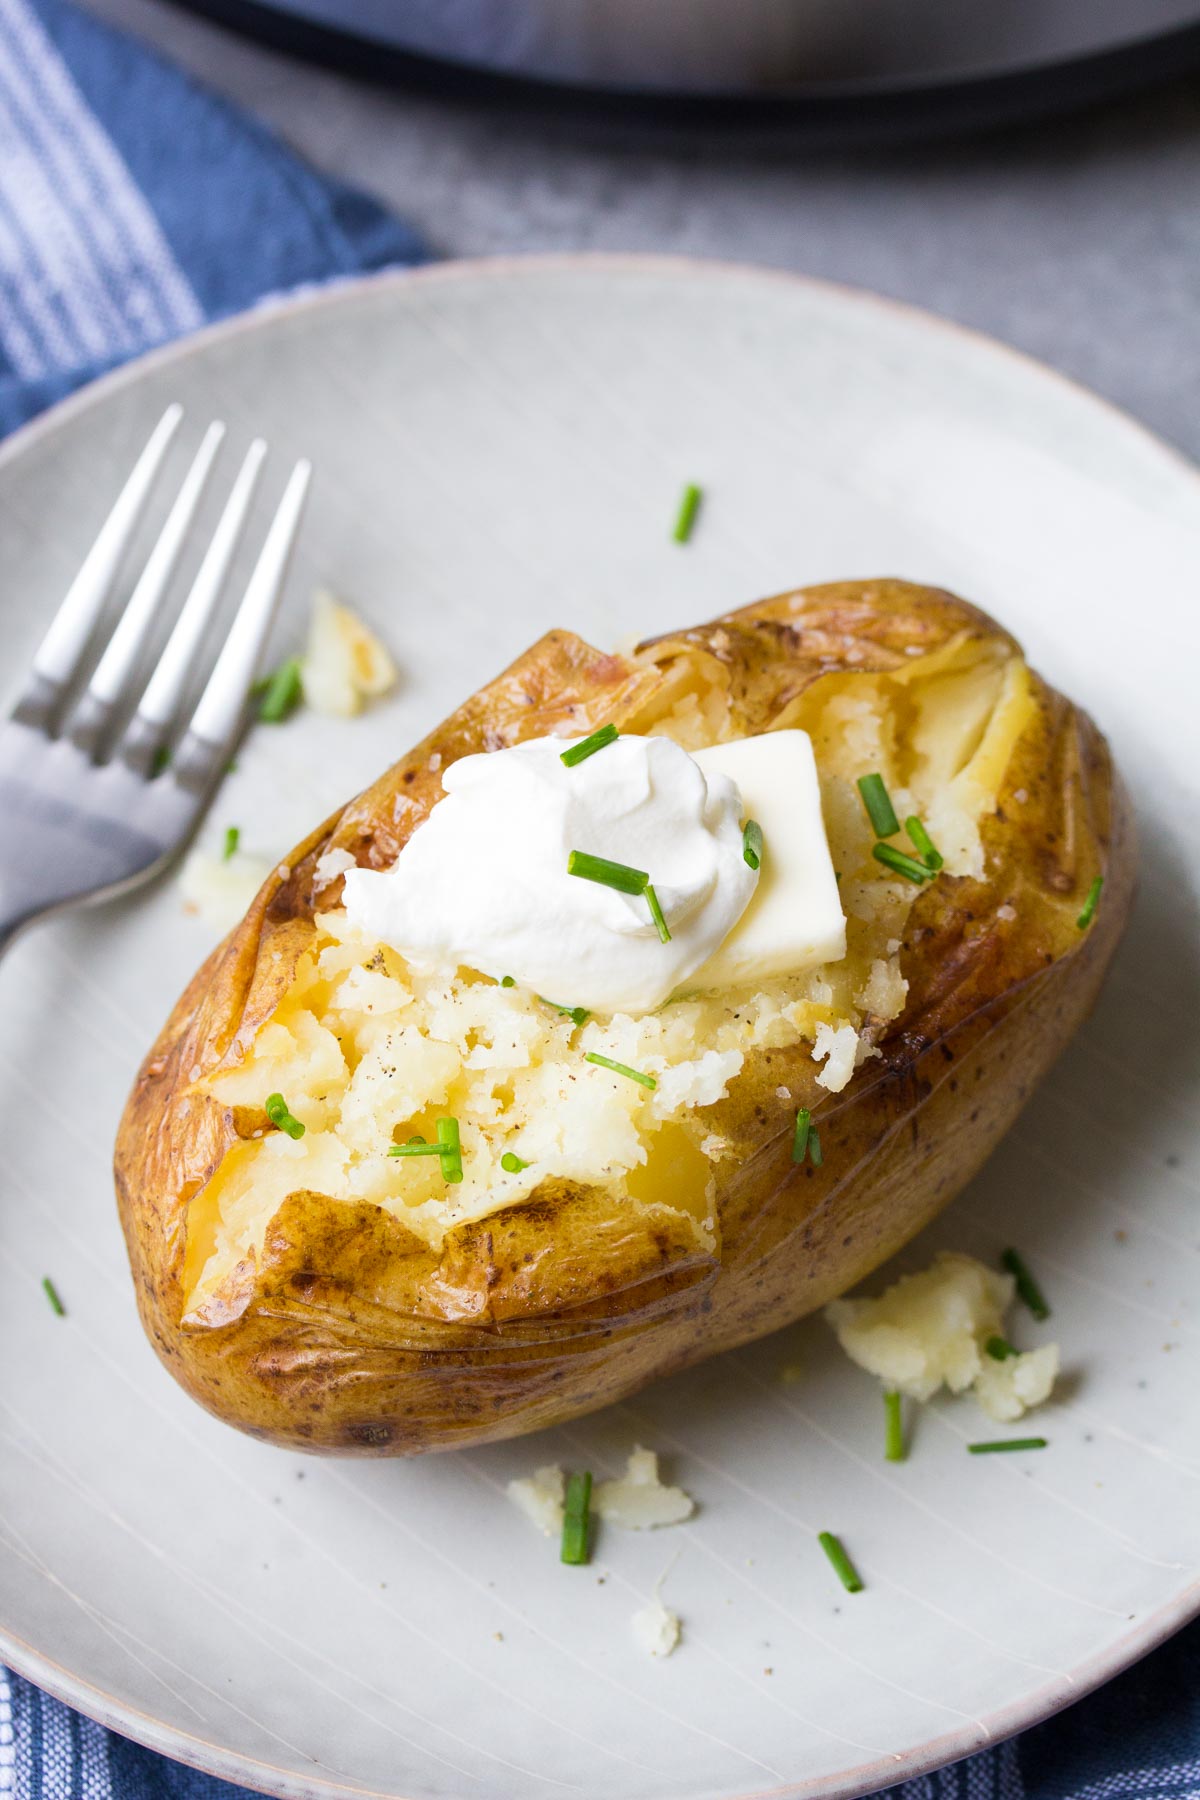 Instant pot baked potato topped with sour cream and chives.